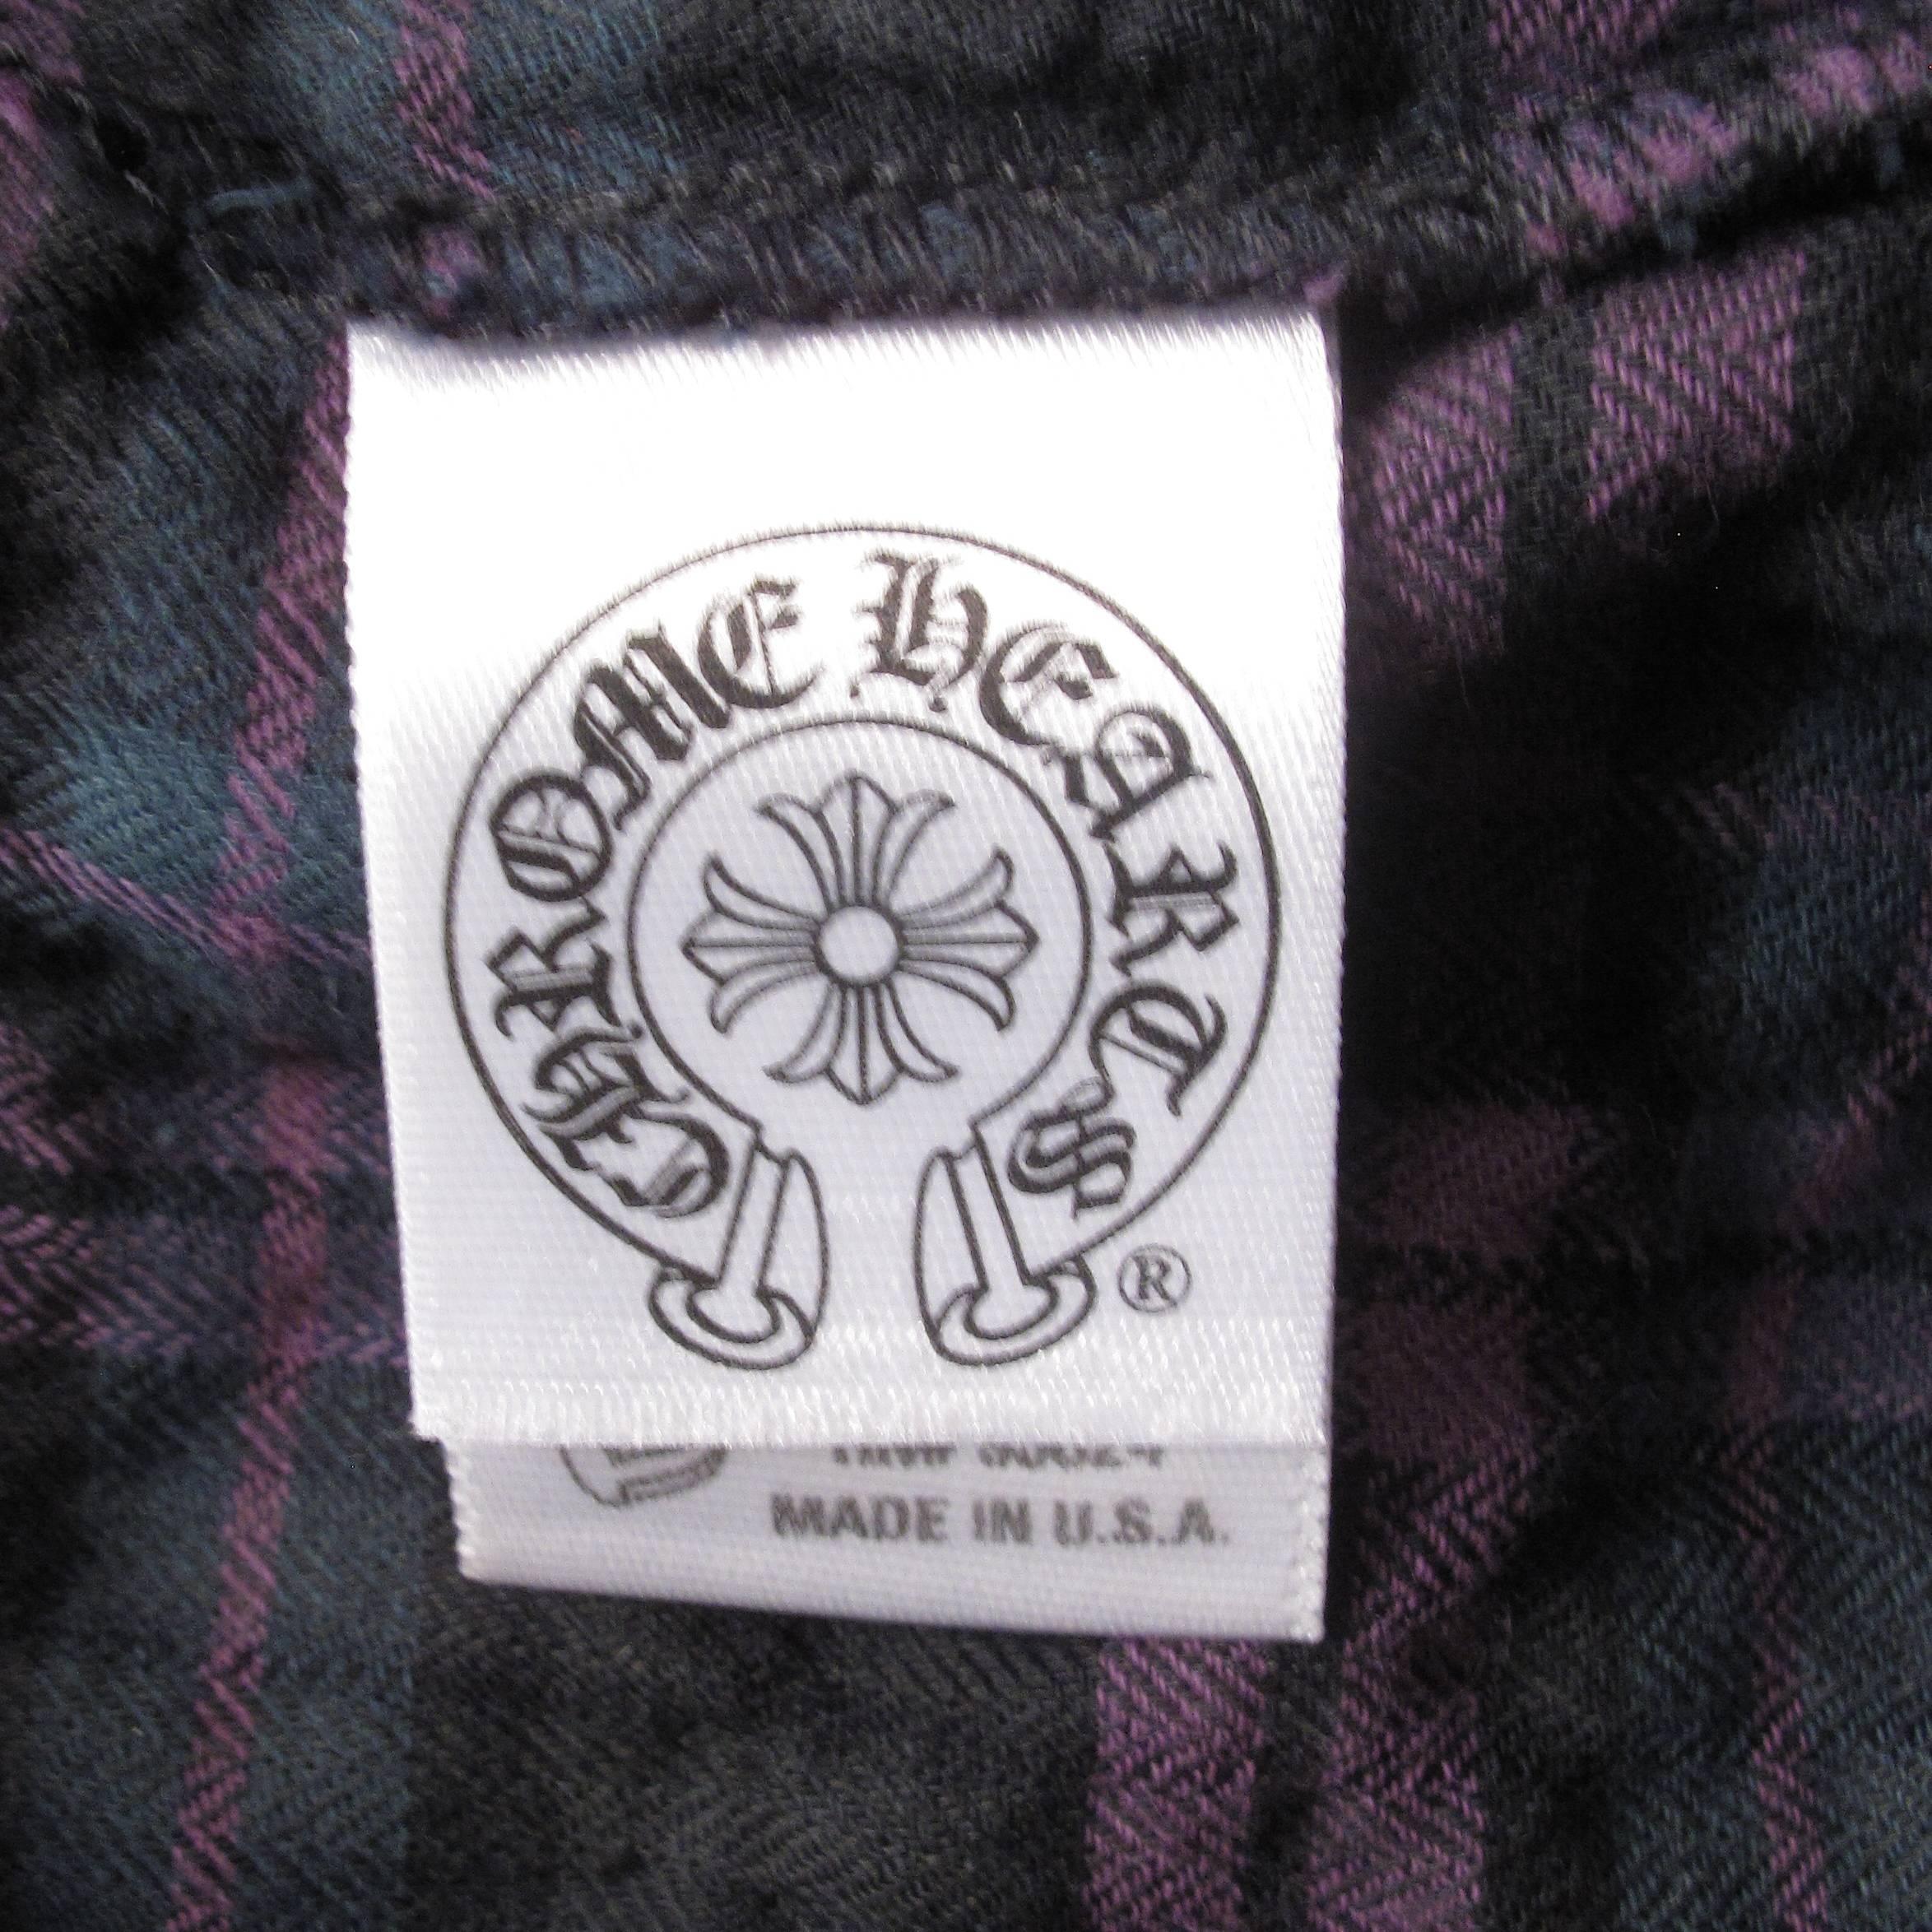 Women's Chrome Hearts Shirt w/ Sterling Silver Buttons Leather Cross Purple Plaid Small